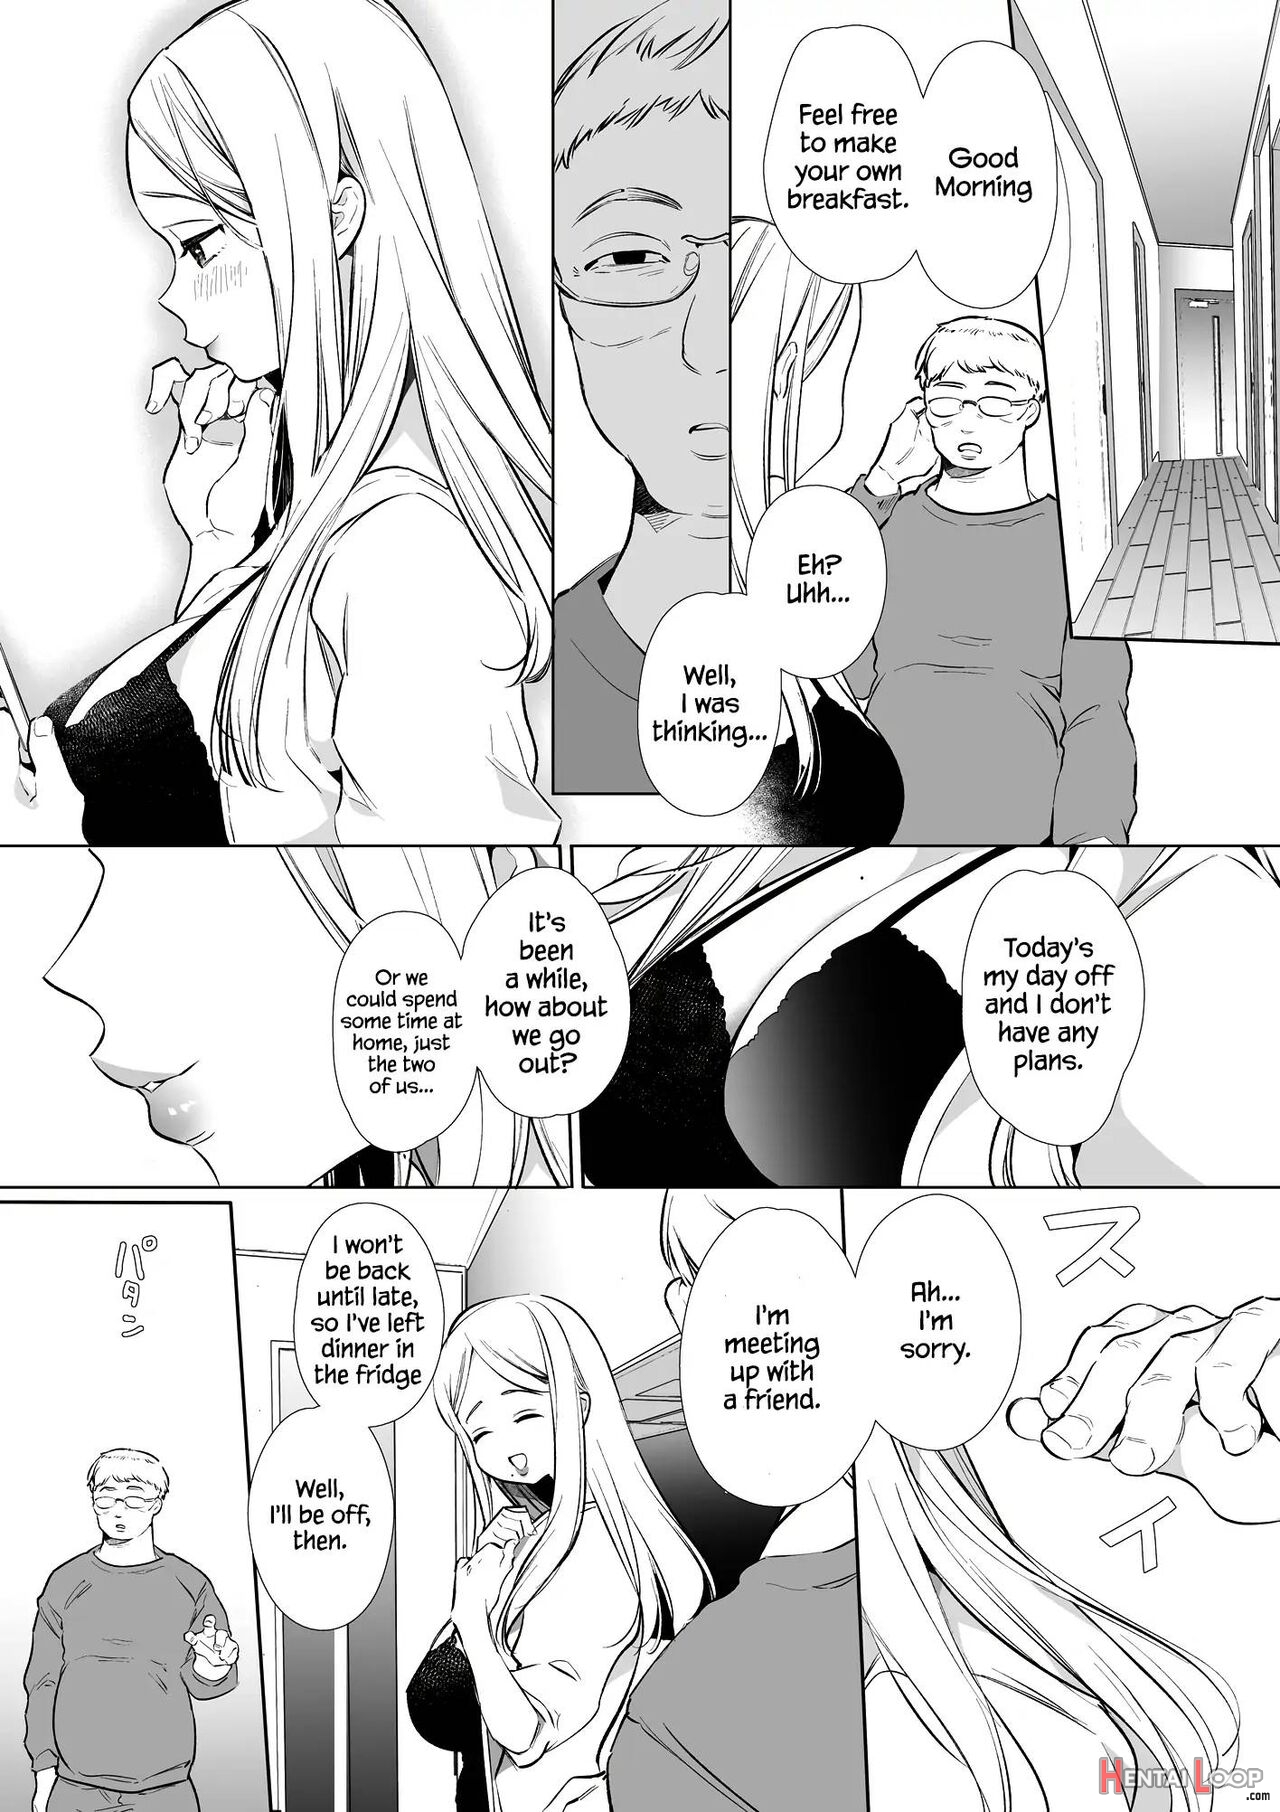 Kana-san Ntr ~ Degradation Of A Housewife By A Guy In An Alter Account ~ page 44